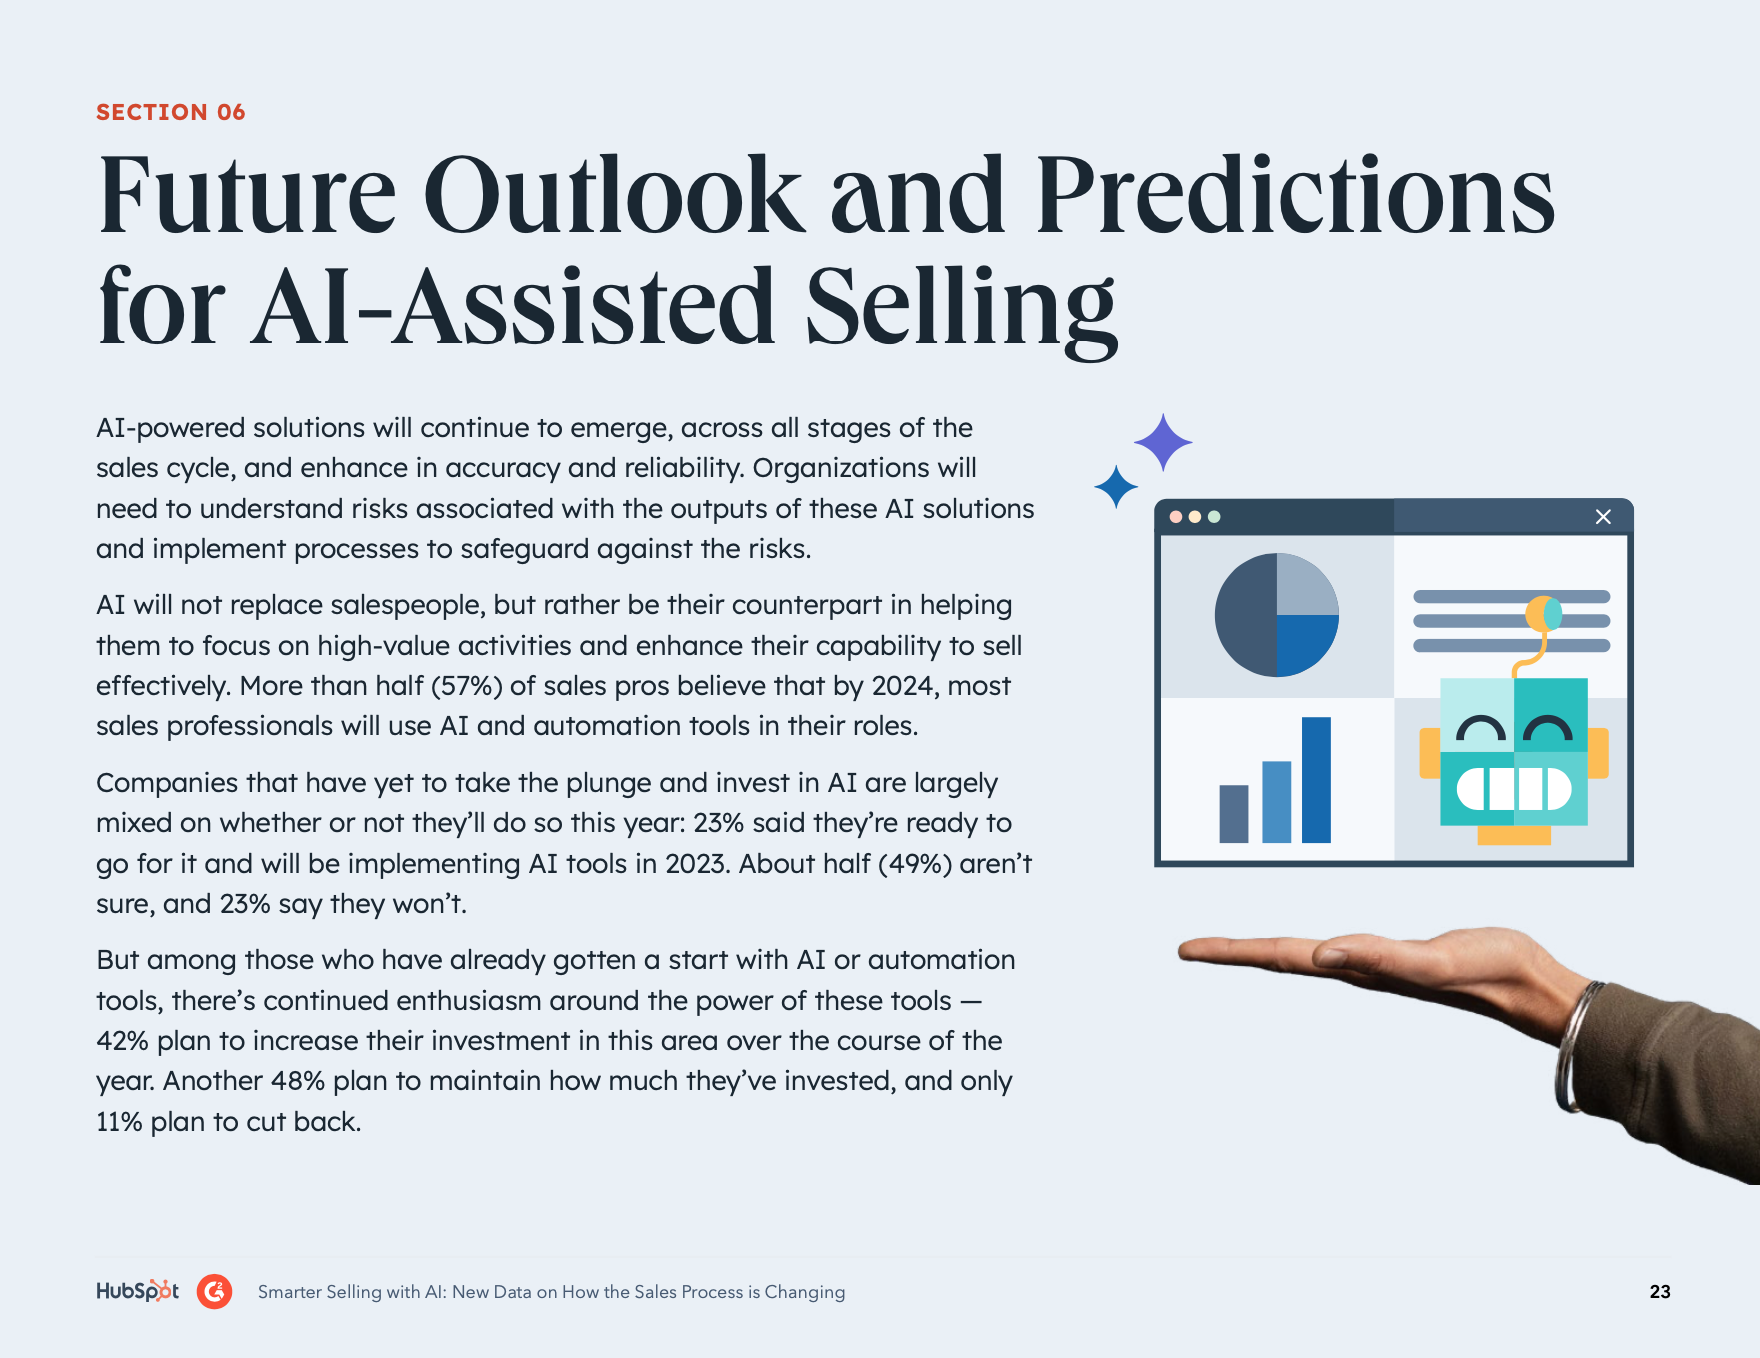 Future Outlook and Predictions for Al-Assisted Selling